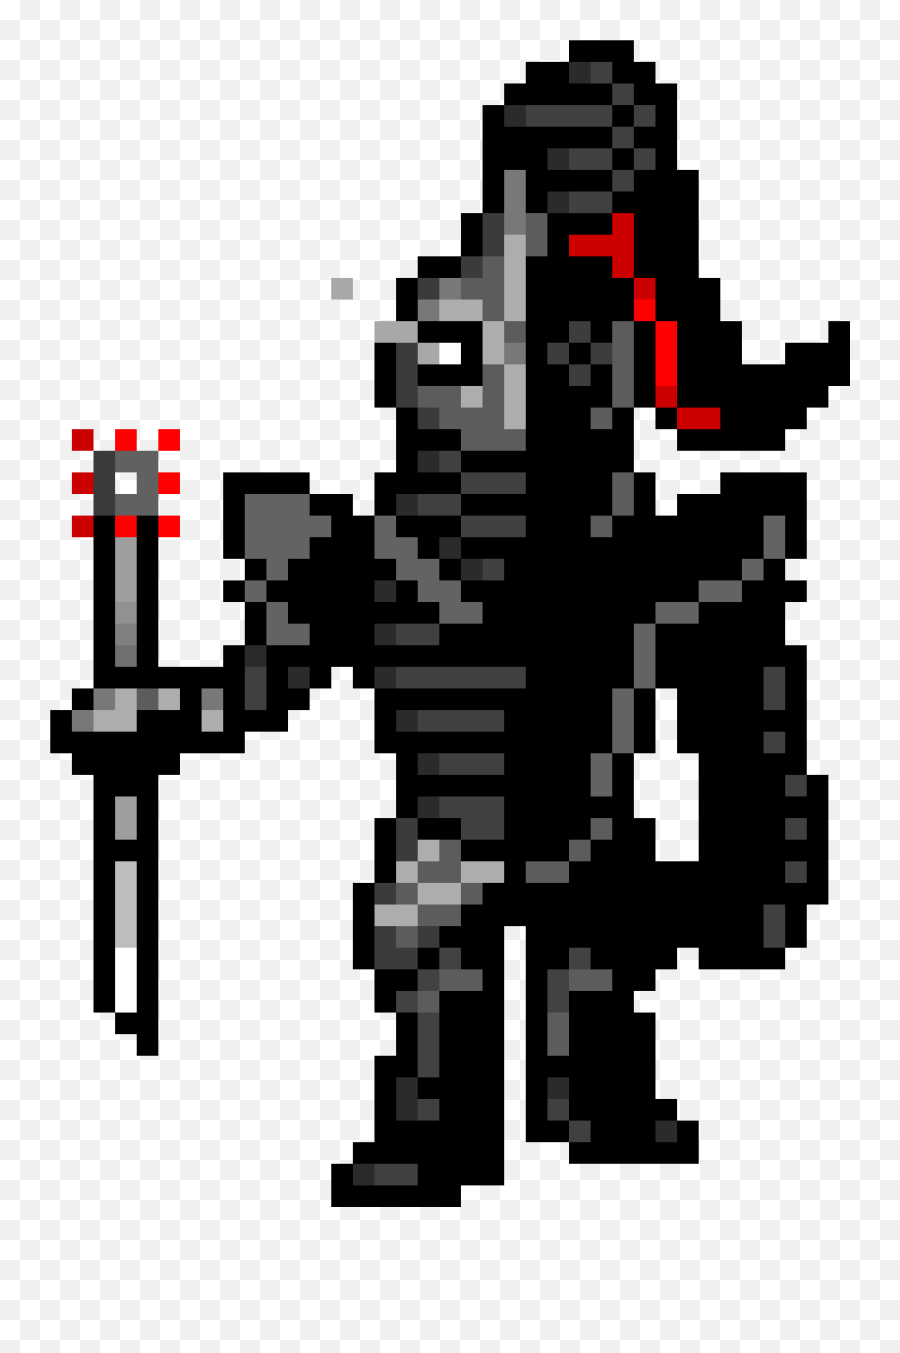 Undyne Sprite With Armor - Pixel Art Undyne Png,Undyne Png